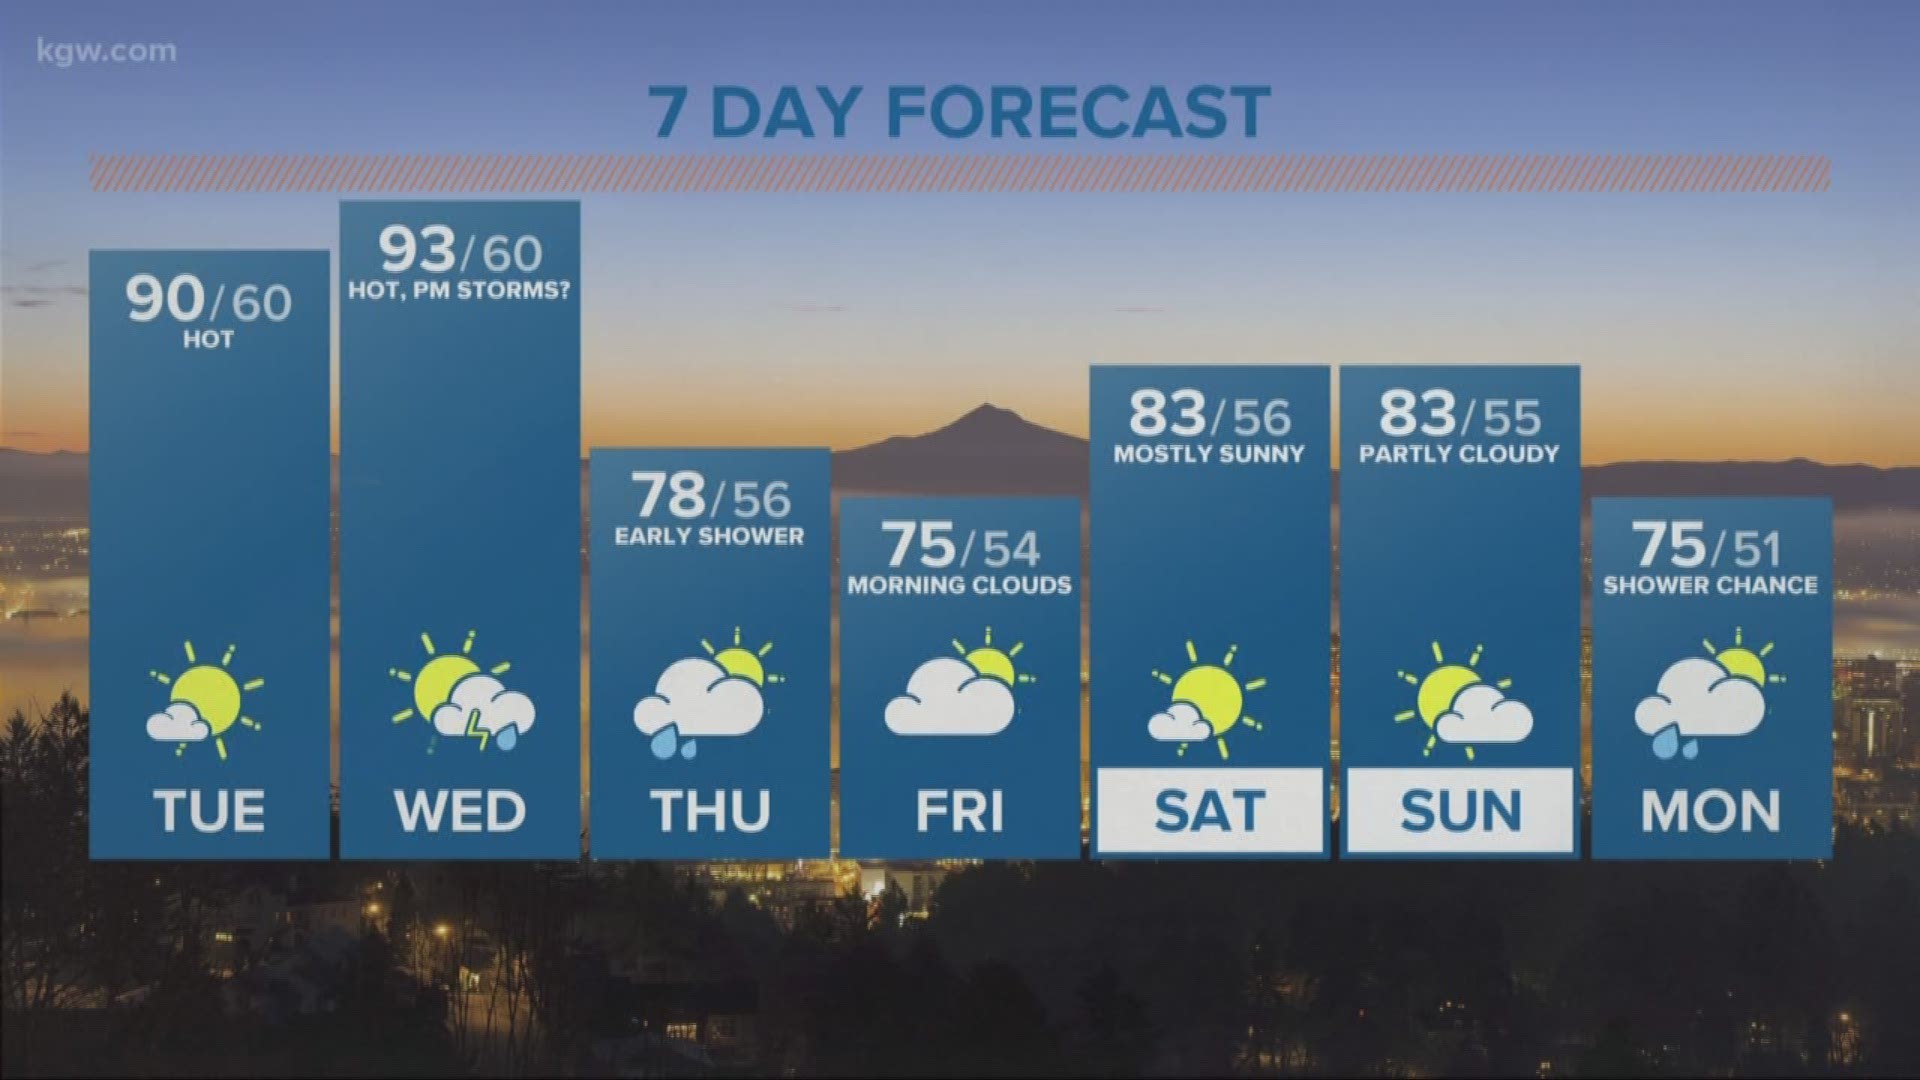 KGW Noon forecast 6-19-18